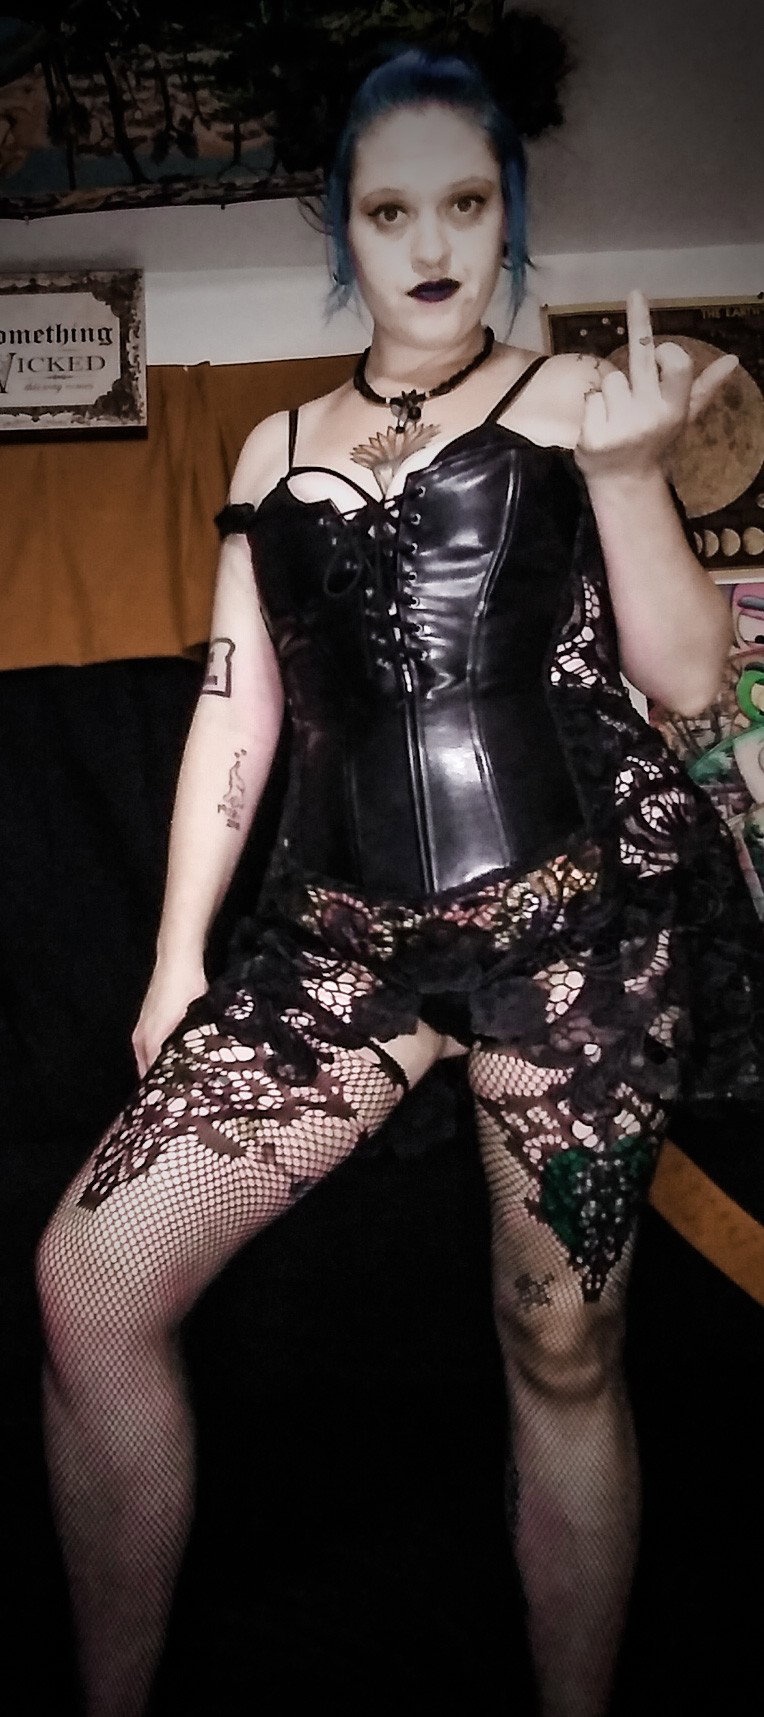 Photo by villainous vixen with the username @villainousvixen, who is a star user,  August 12, 2020 at 5:58 PM and the text says 'MESSAGE ME I LOVE TO TALK!!!

Subscribe to my onlyfans! One monthly price for all access content!

villainousvixen'